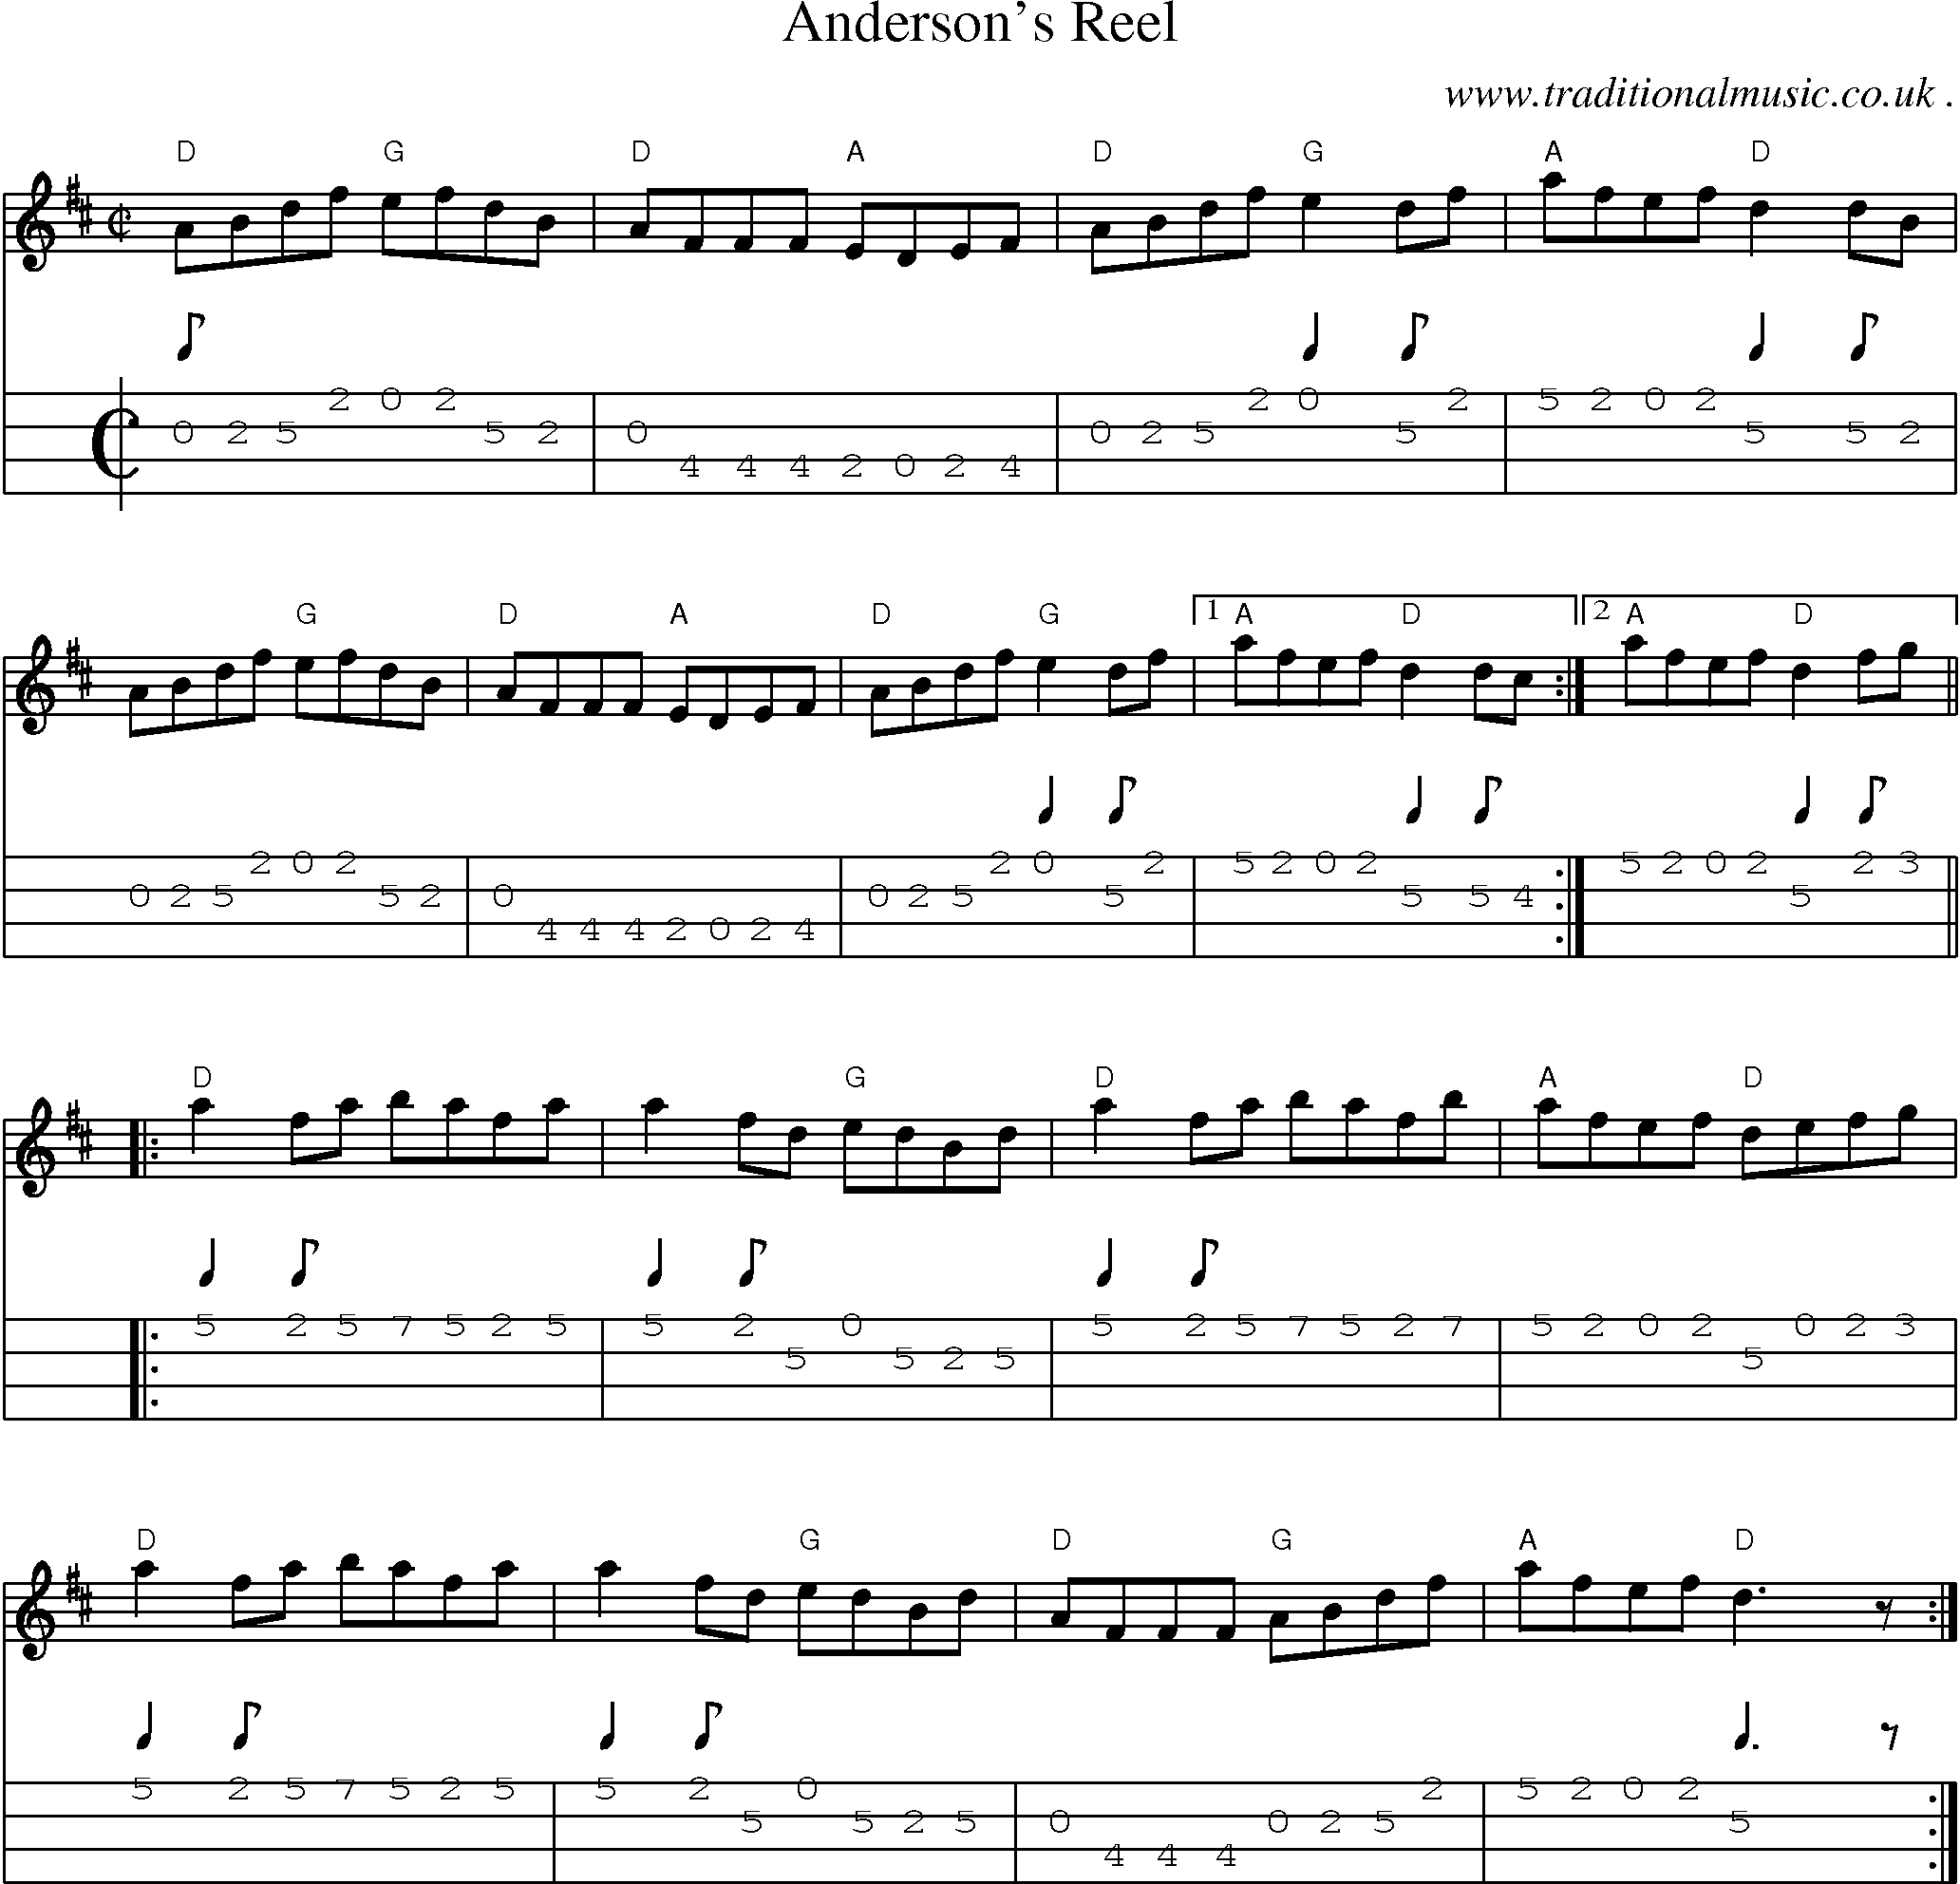 Music Score and Guitar Tabs for Andersons Reel